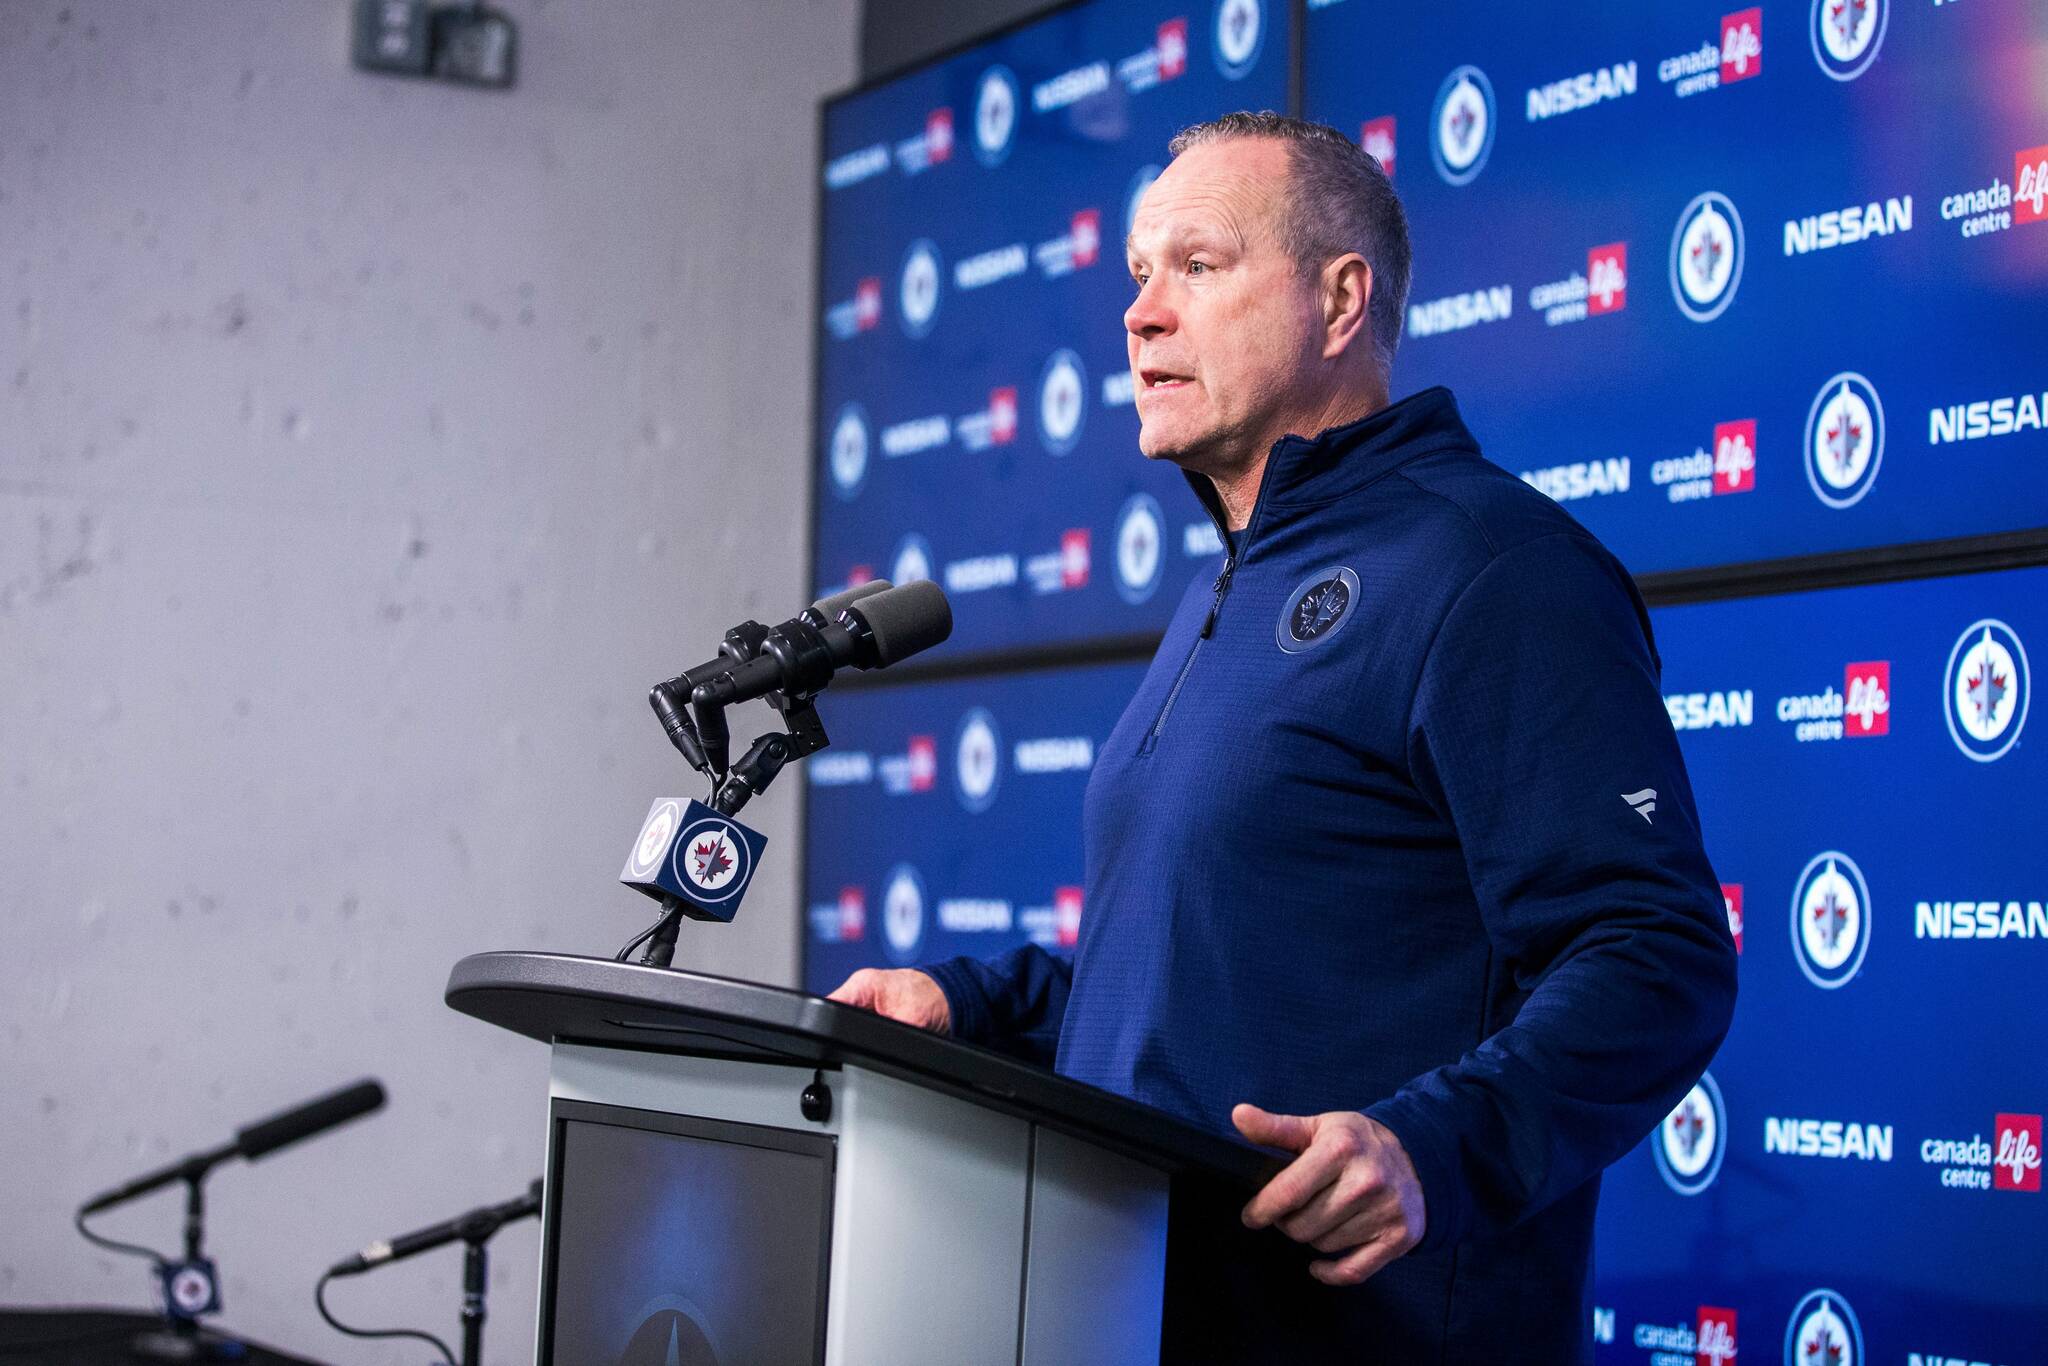 

<p></noscript>MIKAELA MACKENZIE / WINNIPEG FREE PRESS FILES</p>
<p>Jets head coach Dave Lowry has often referenced the same handful of well-executed games as the blueprint for how he wants his team to play.</p>
<p>” width=”2048″ height=”1366″ /><figcaption>
<p>MIKAELA MACKENZIE / WINNIPEG FREE PRESS FILES</p>
<p>Jets head coach Dave Lowry has often referenced the same handful of well-executed games as the blueprint for how he wants his team to play.</p>
</figcaption></figure>
<p>But he also knows that with the Jets remain outside the playoff line, and these next 36 games will only continue to bring a high sense of urgency and emotion. And he’s not about to put a lid on the way they’re playing. </p>
<p>“With a big hit sometimes comes excitement,” coach Lowry said. “We’re going to continue to play the same way. The expectation is we’re a good team when we have emotion, and we have physicality in our game. It opens up space for some of our other guys.” </p>
<p><a href=